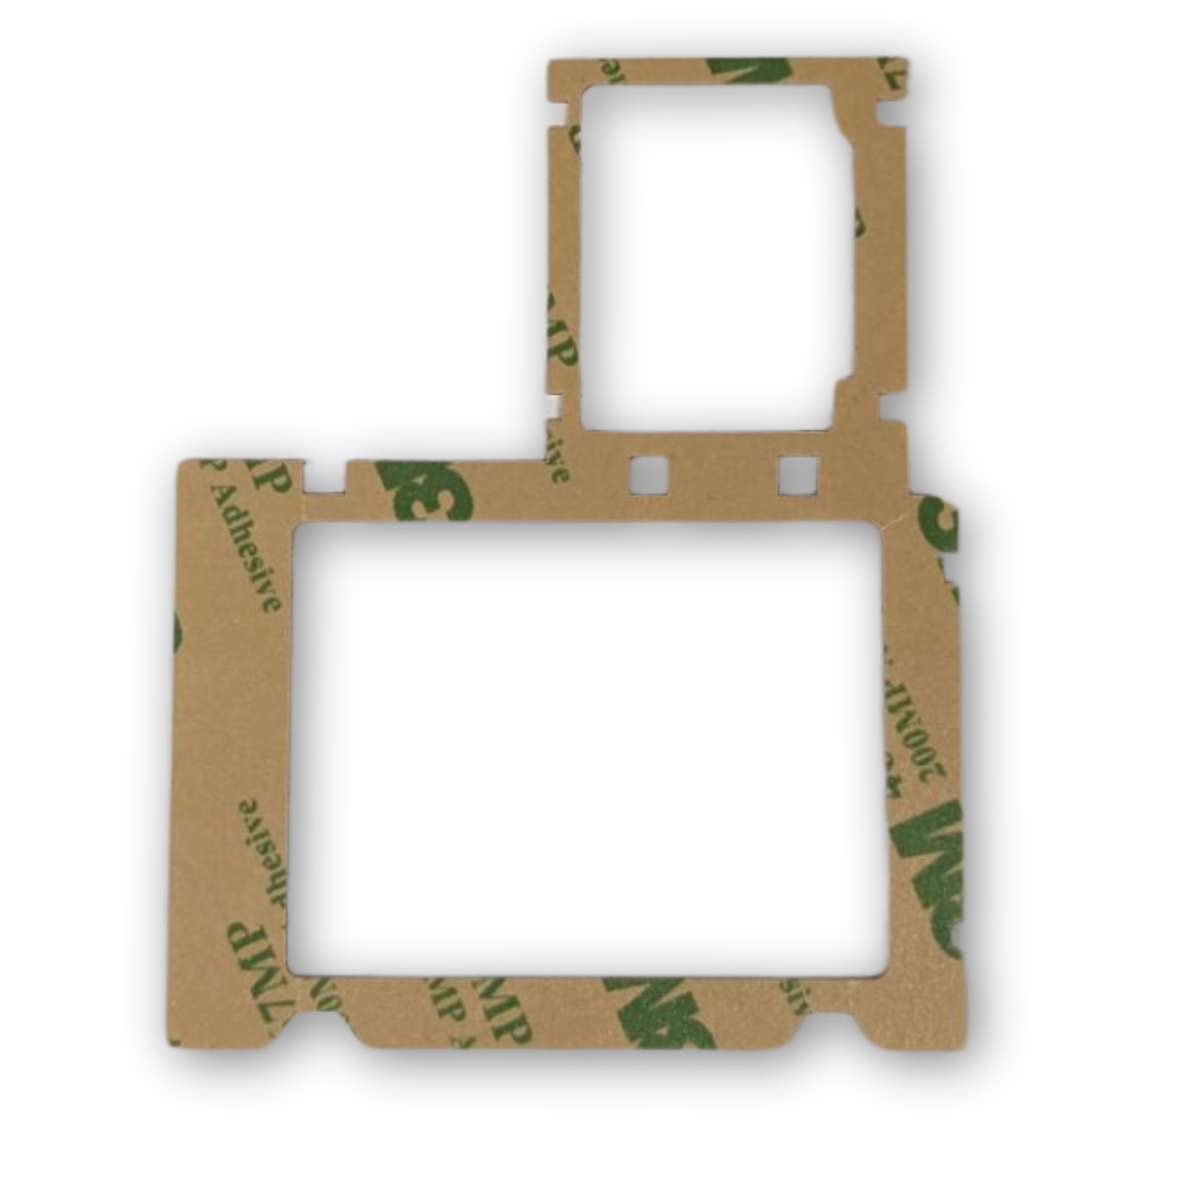 Gaskets for membrane switches